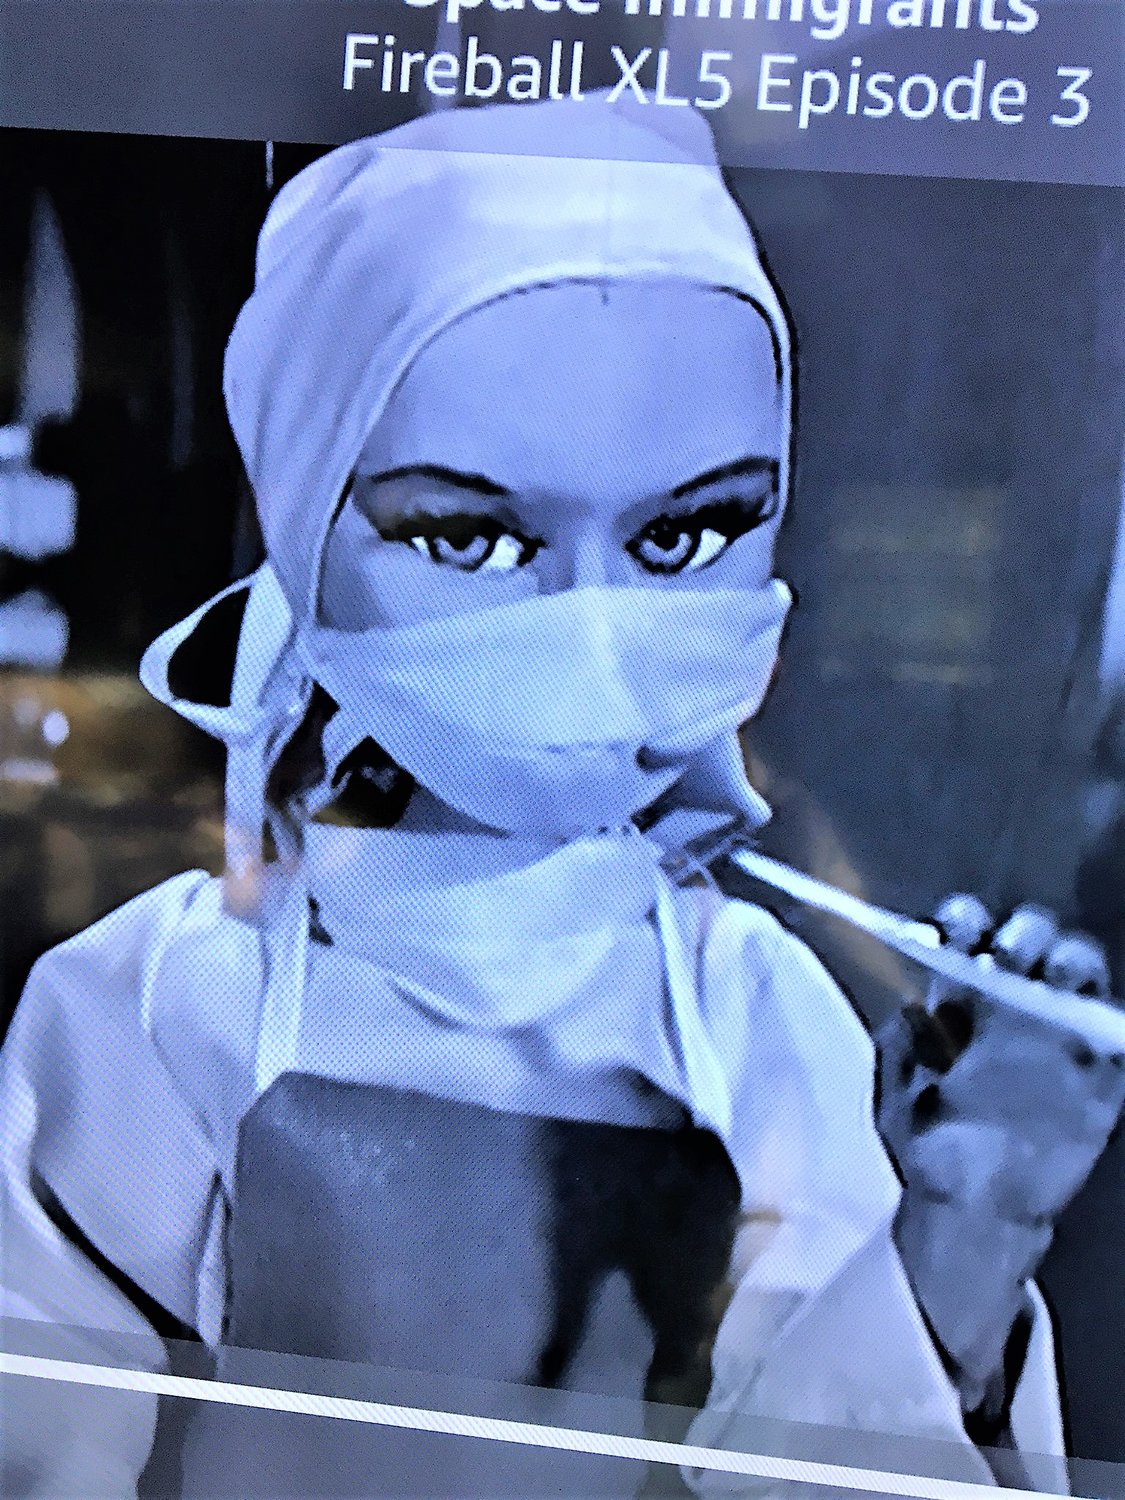 Once I caught this eerily mask-clad marionette in a pandemic-themed episode oaf the ‘60s children’s puppet show “Fireball XL-5,” I abandoned my search for innocence lost.